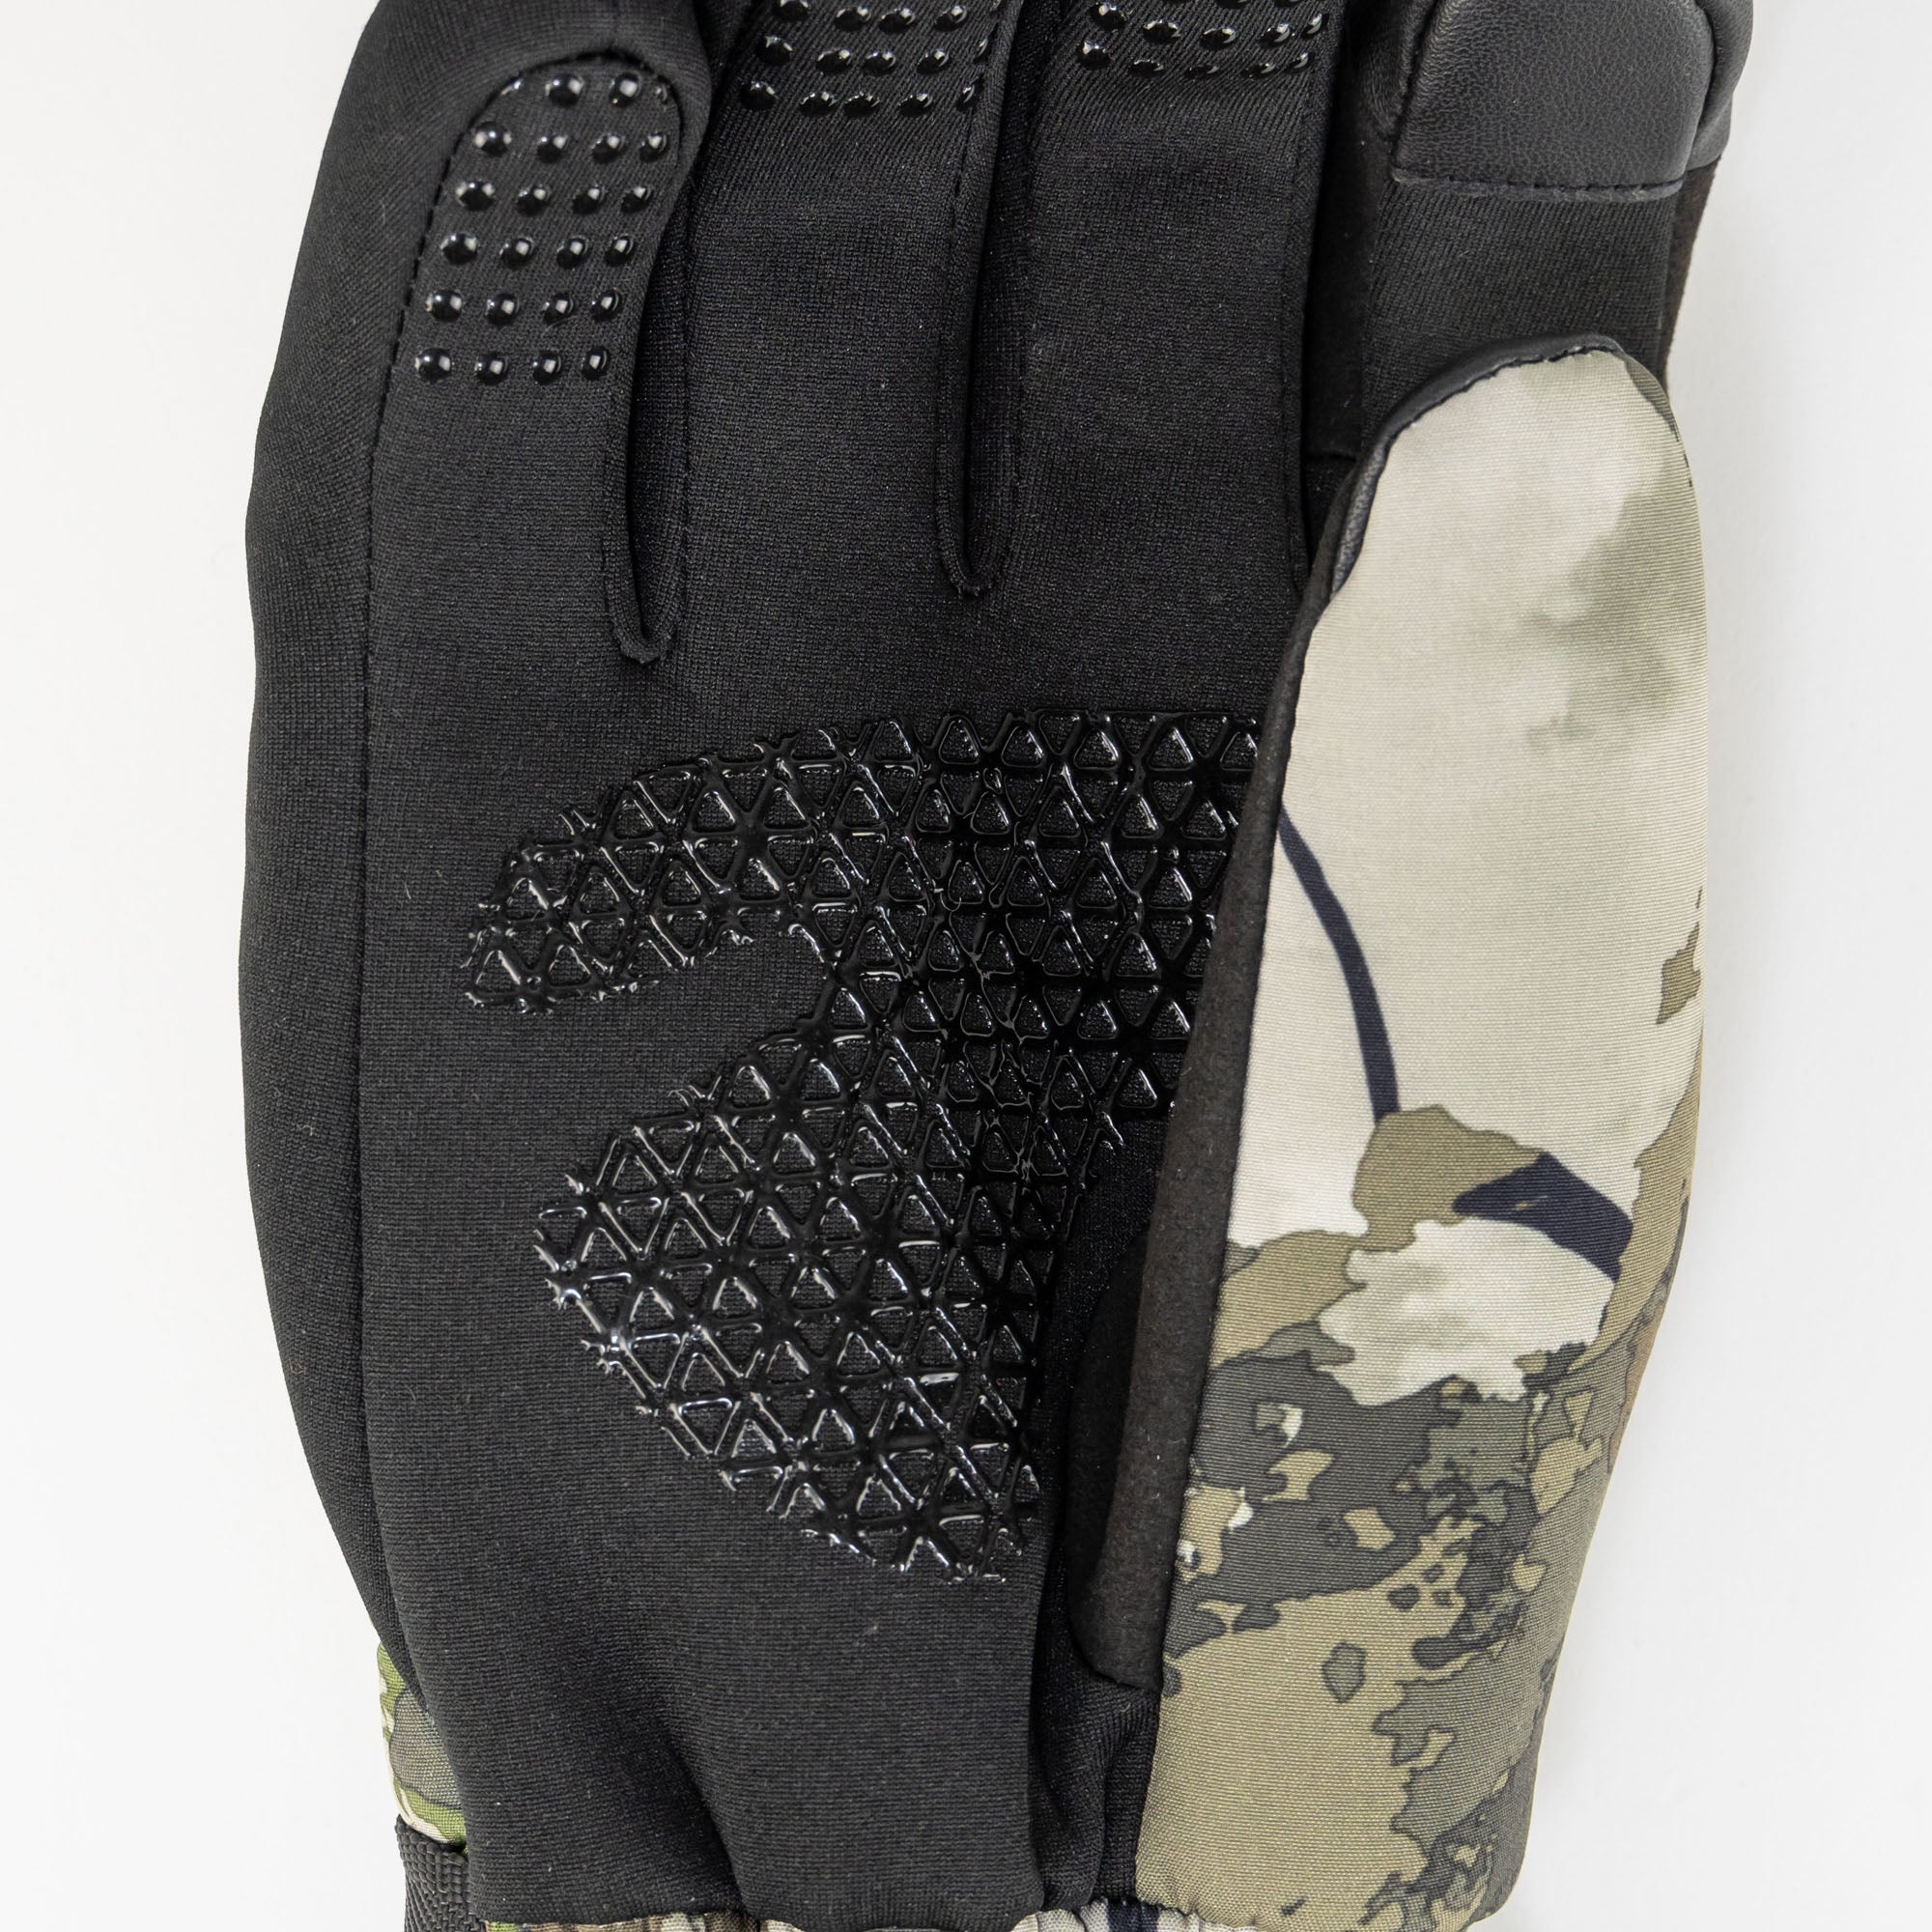 MOBILE WARMING KCX Terrain Heated Hunting Gloves - Unisex Multi (Size: M)